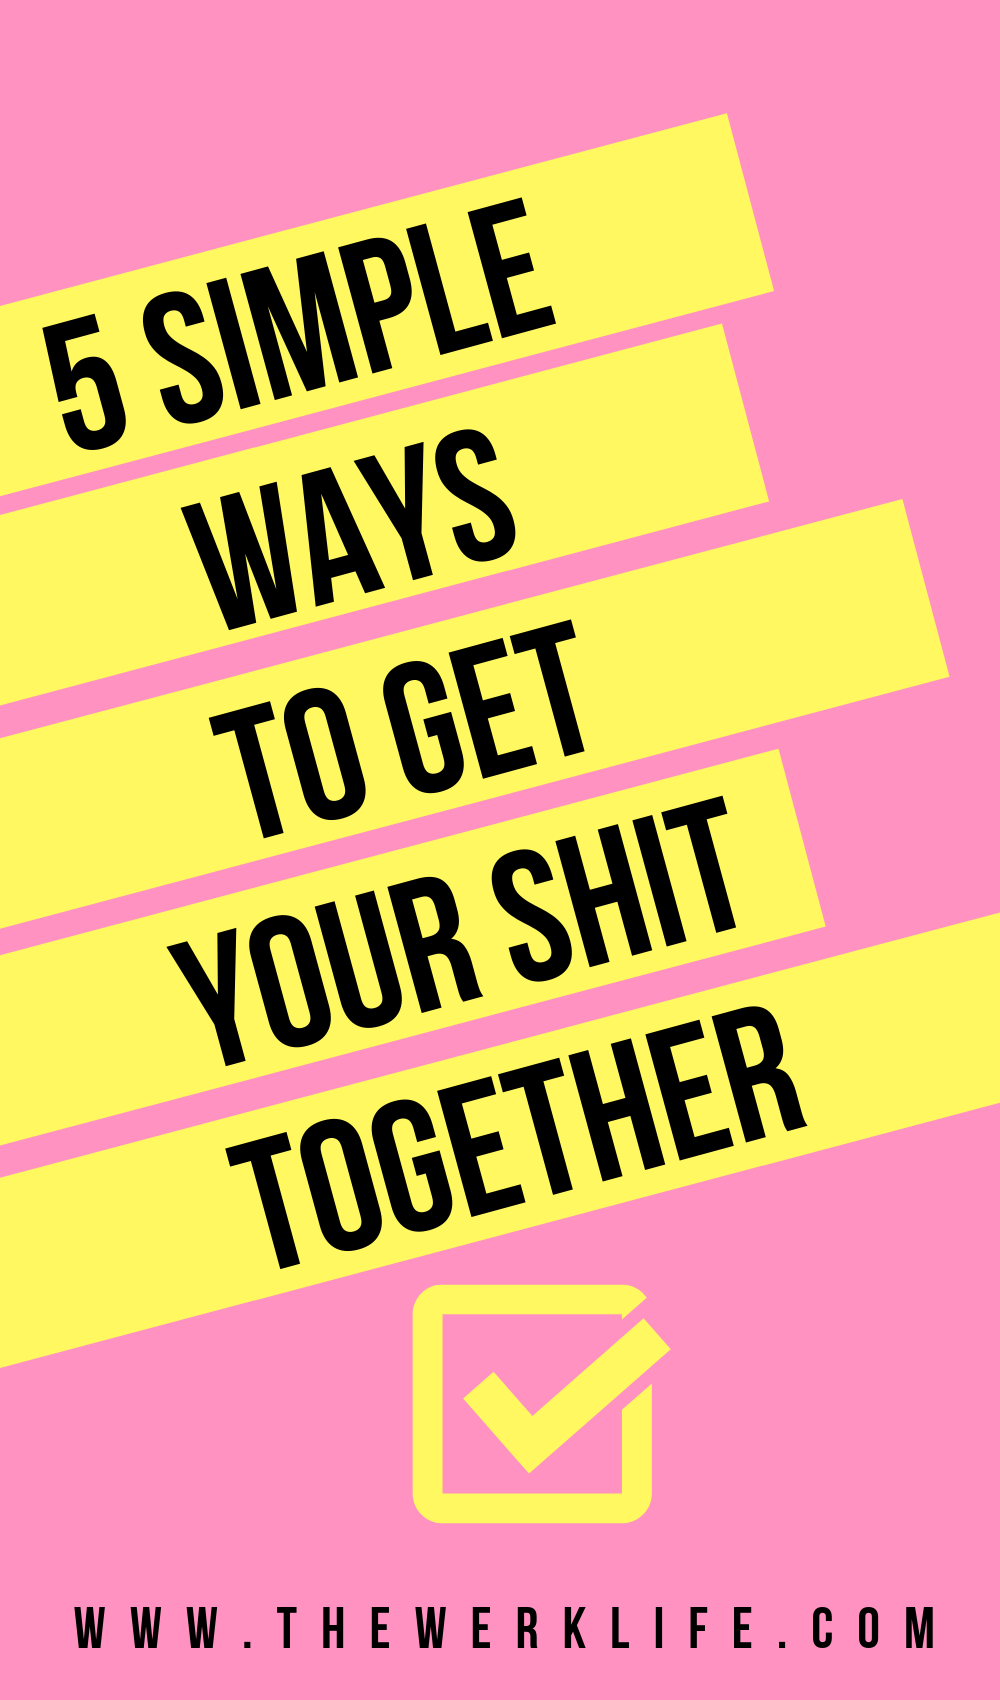 5 Simple Ways to Get Your Shit Together